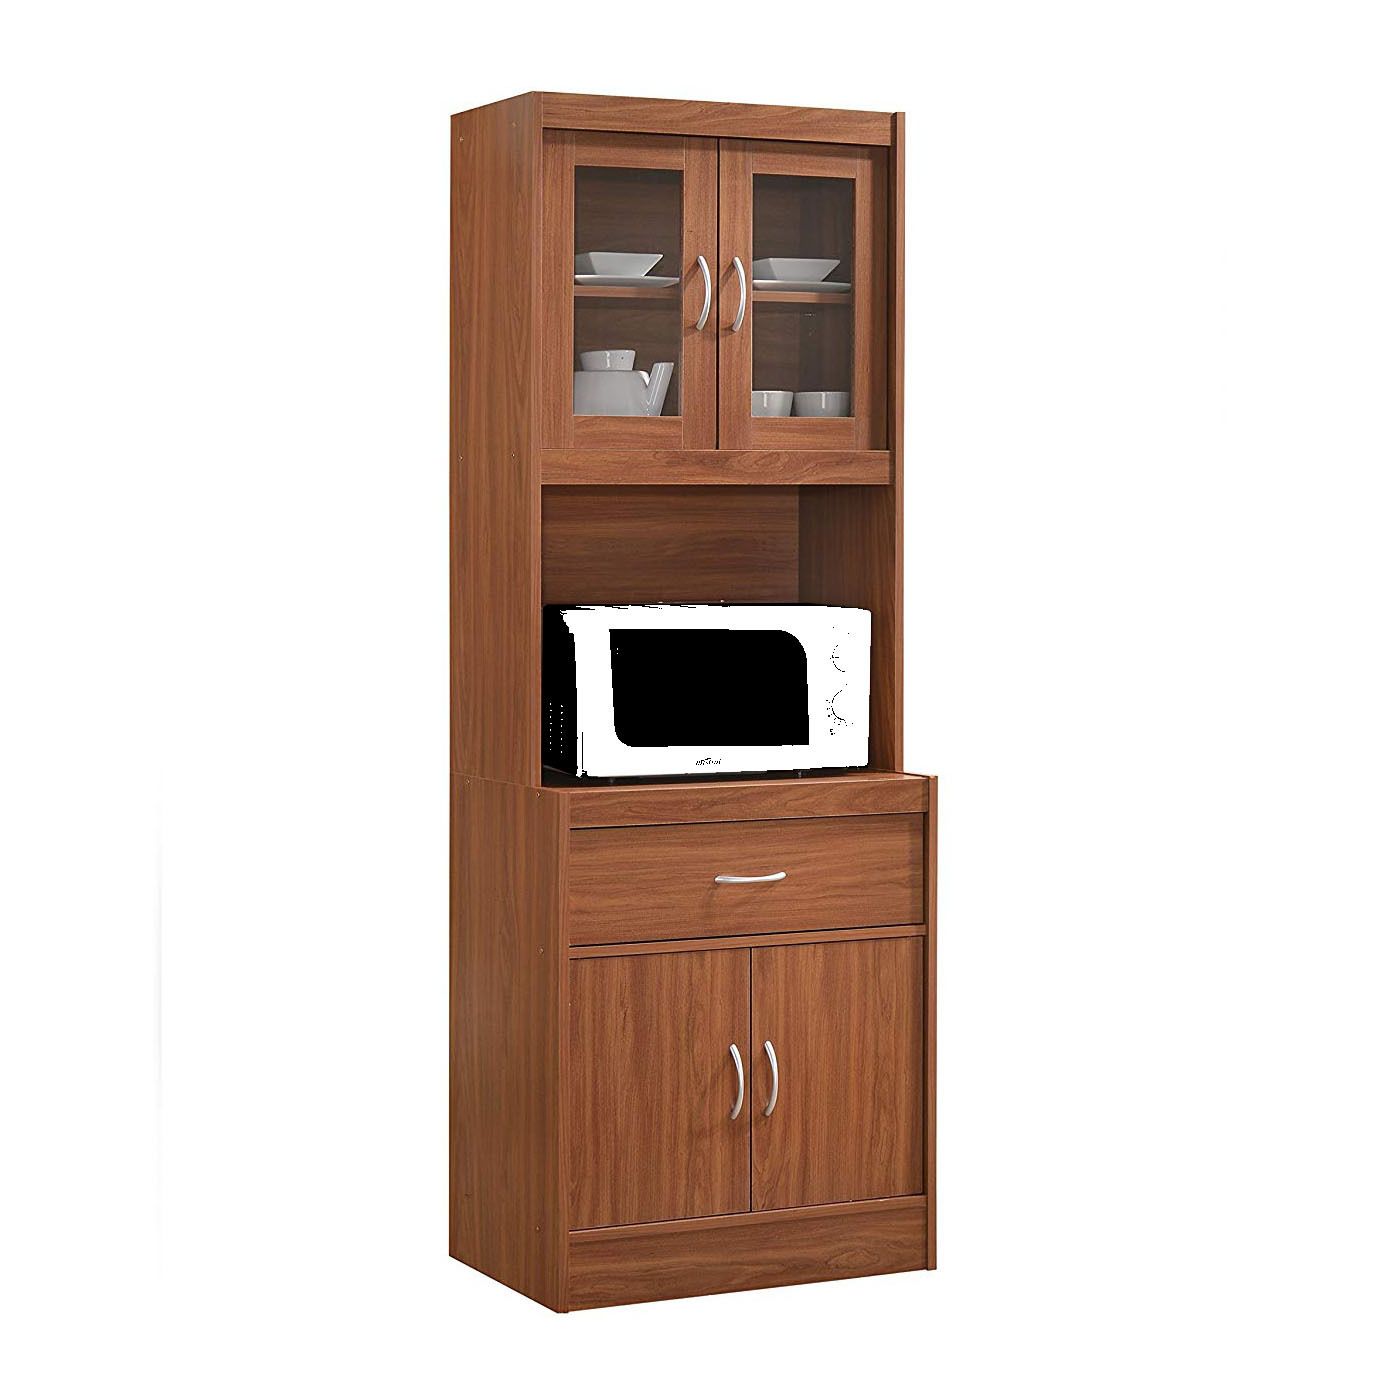 Image for Hodedah Import 70" Tall Top/Bottom Enclosed Kitchen Cabinet with Drawer, Cherry at Kohl's.